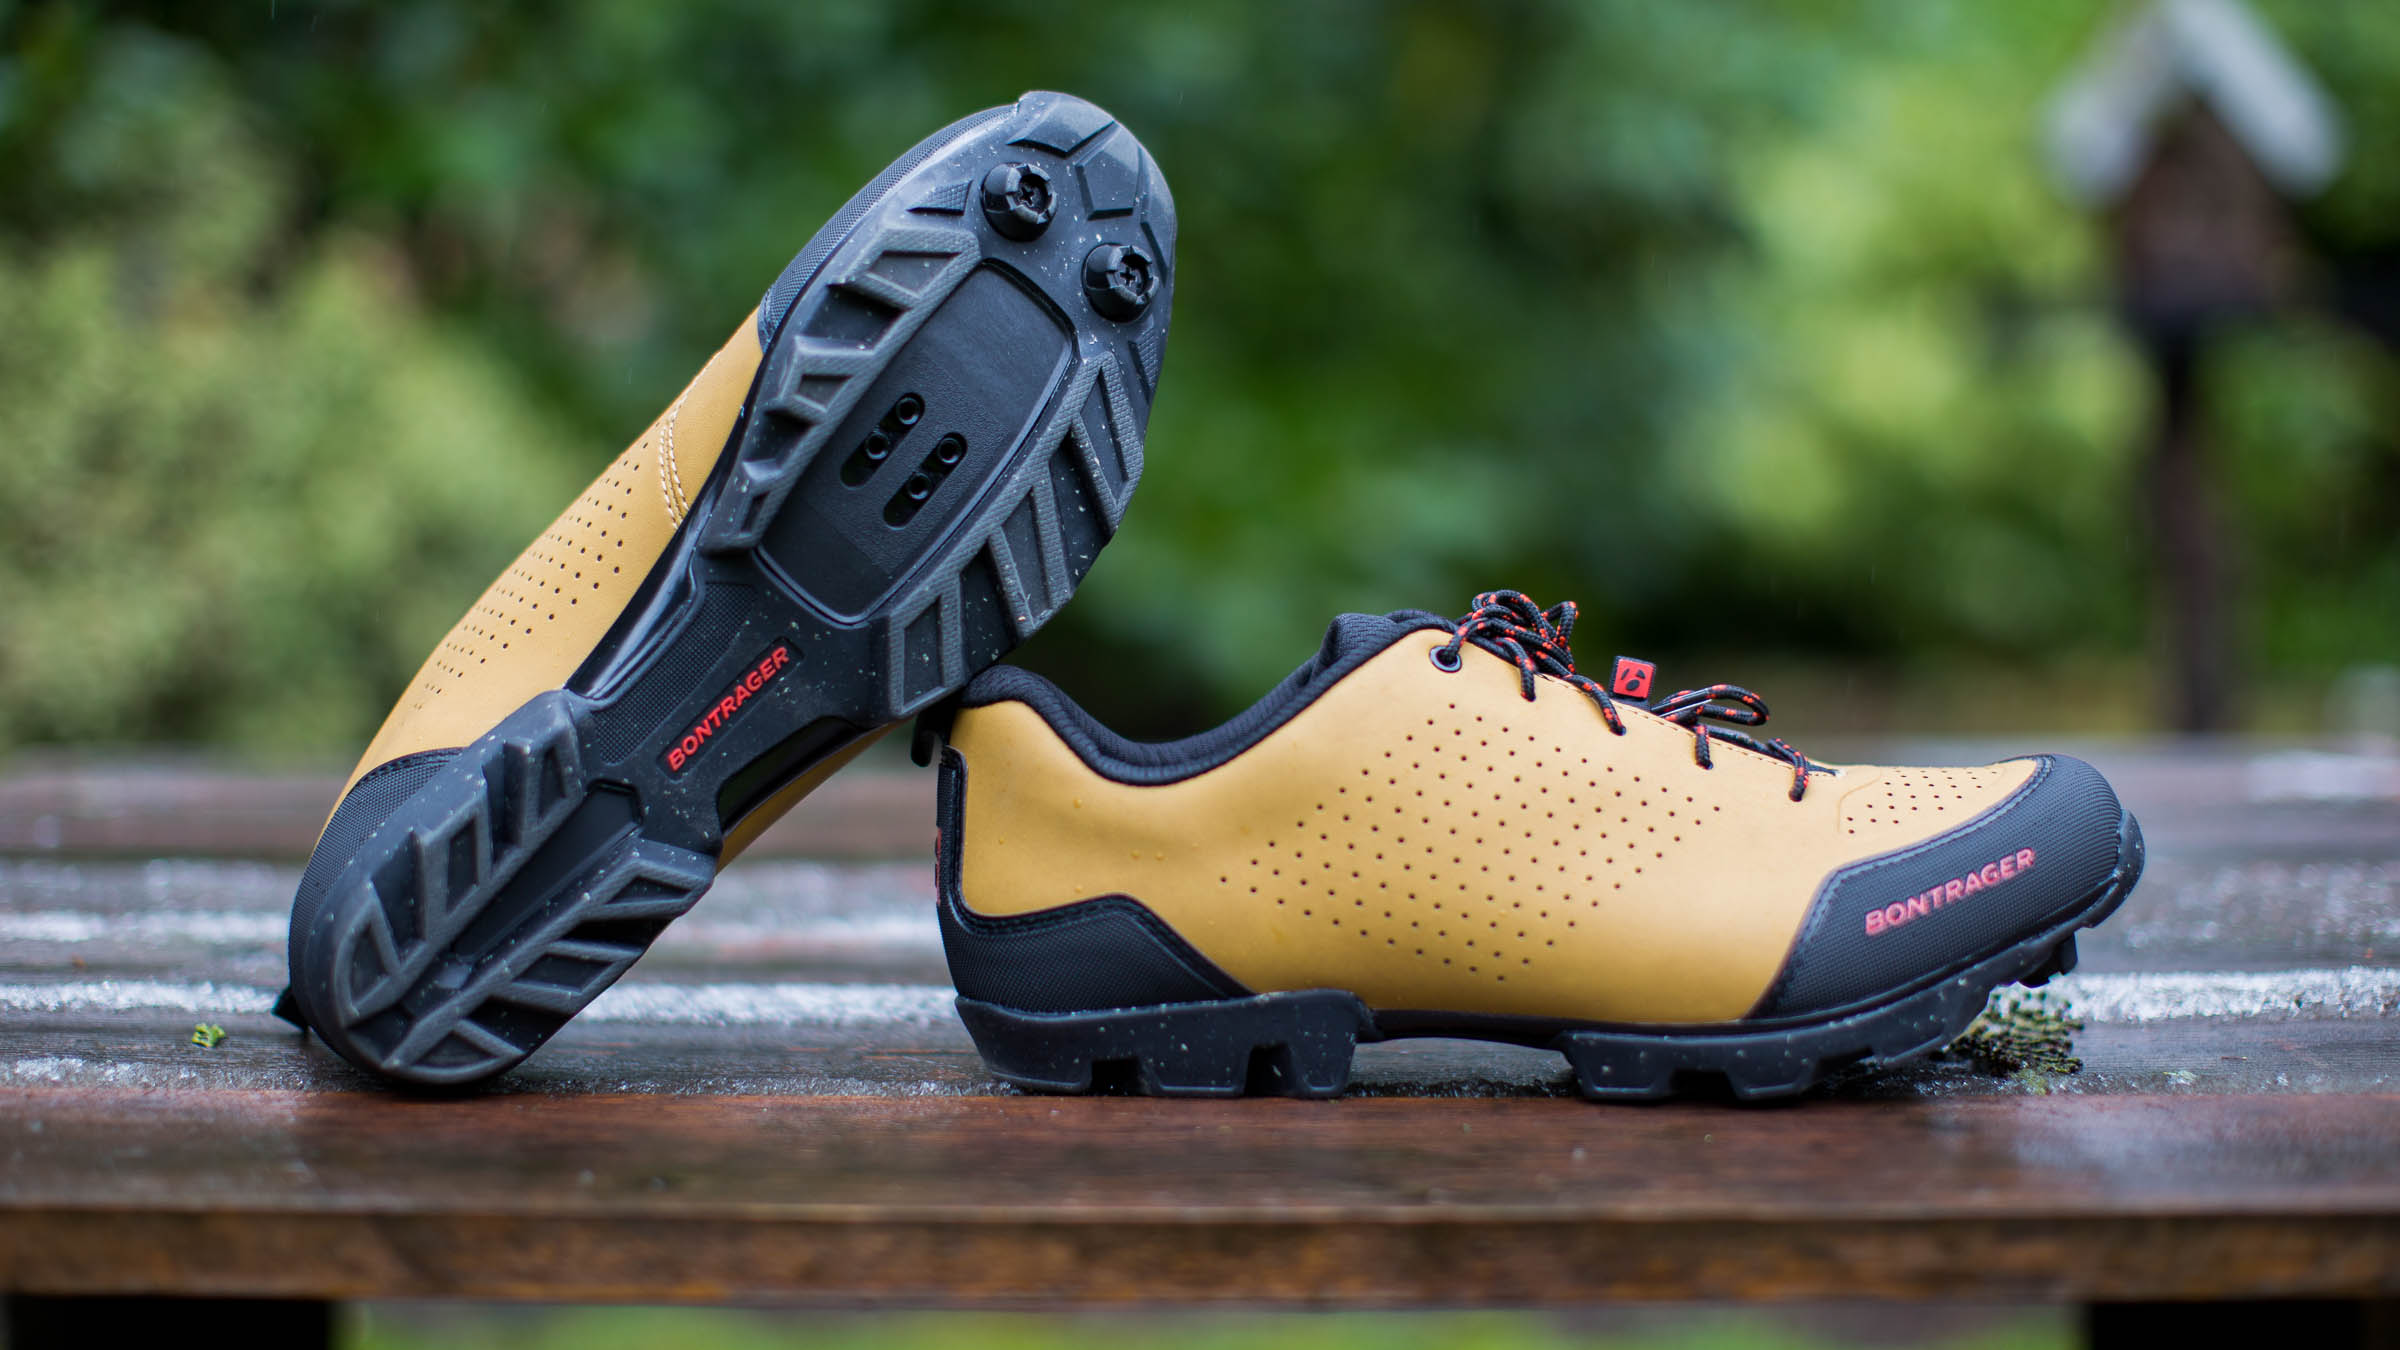 cycling shoes for gravel riding